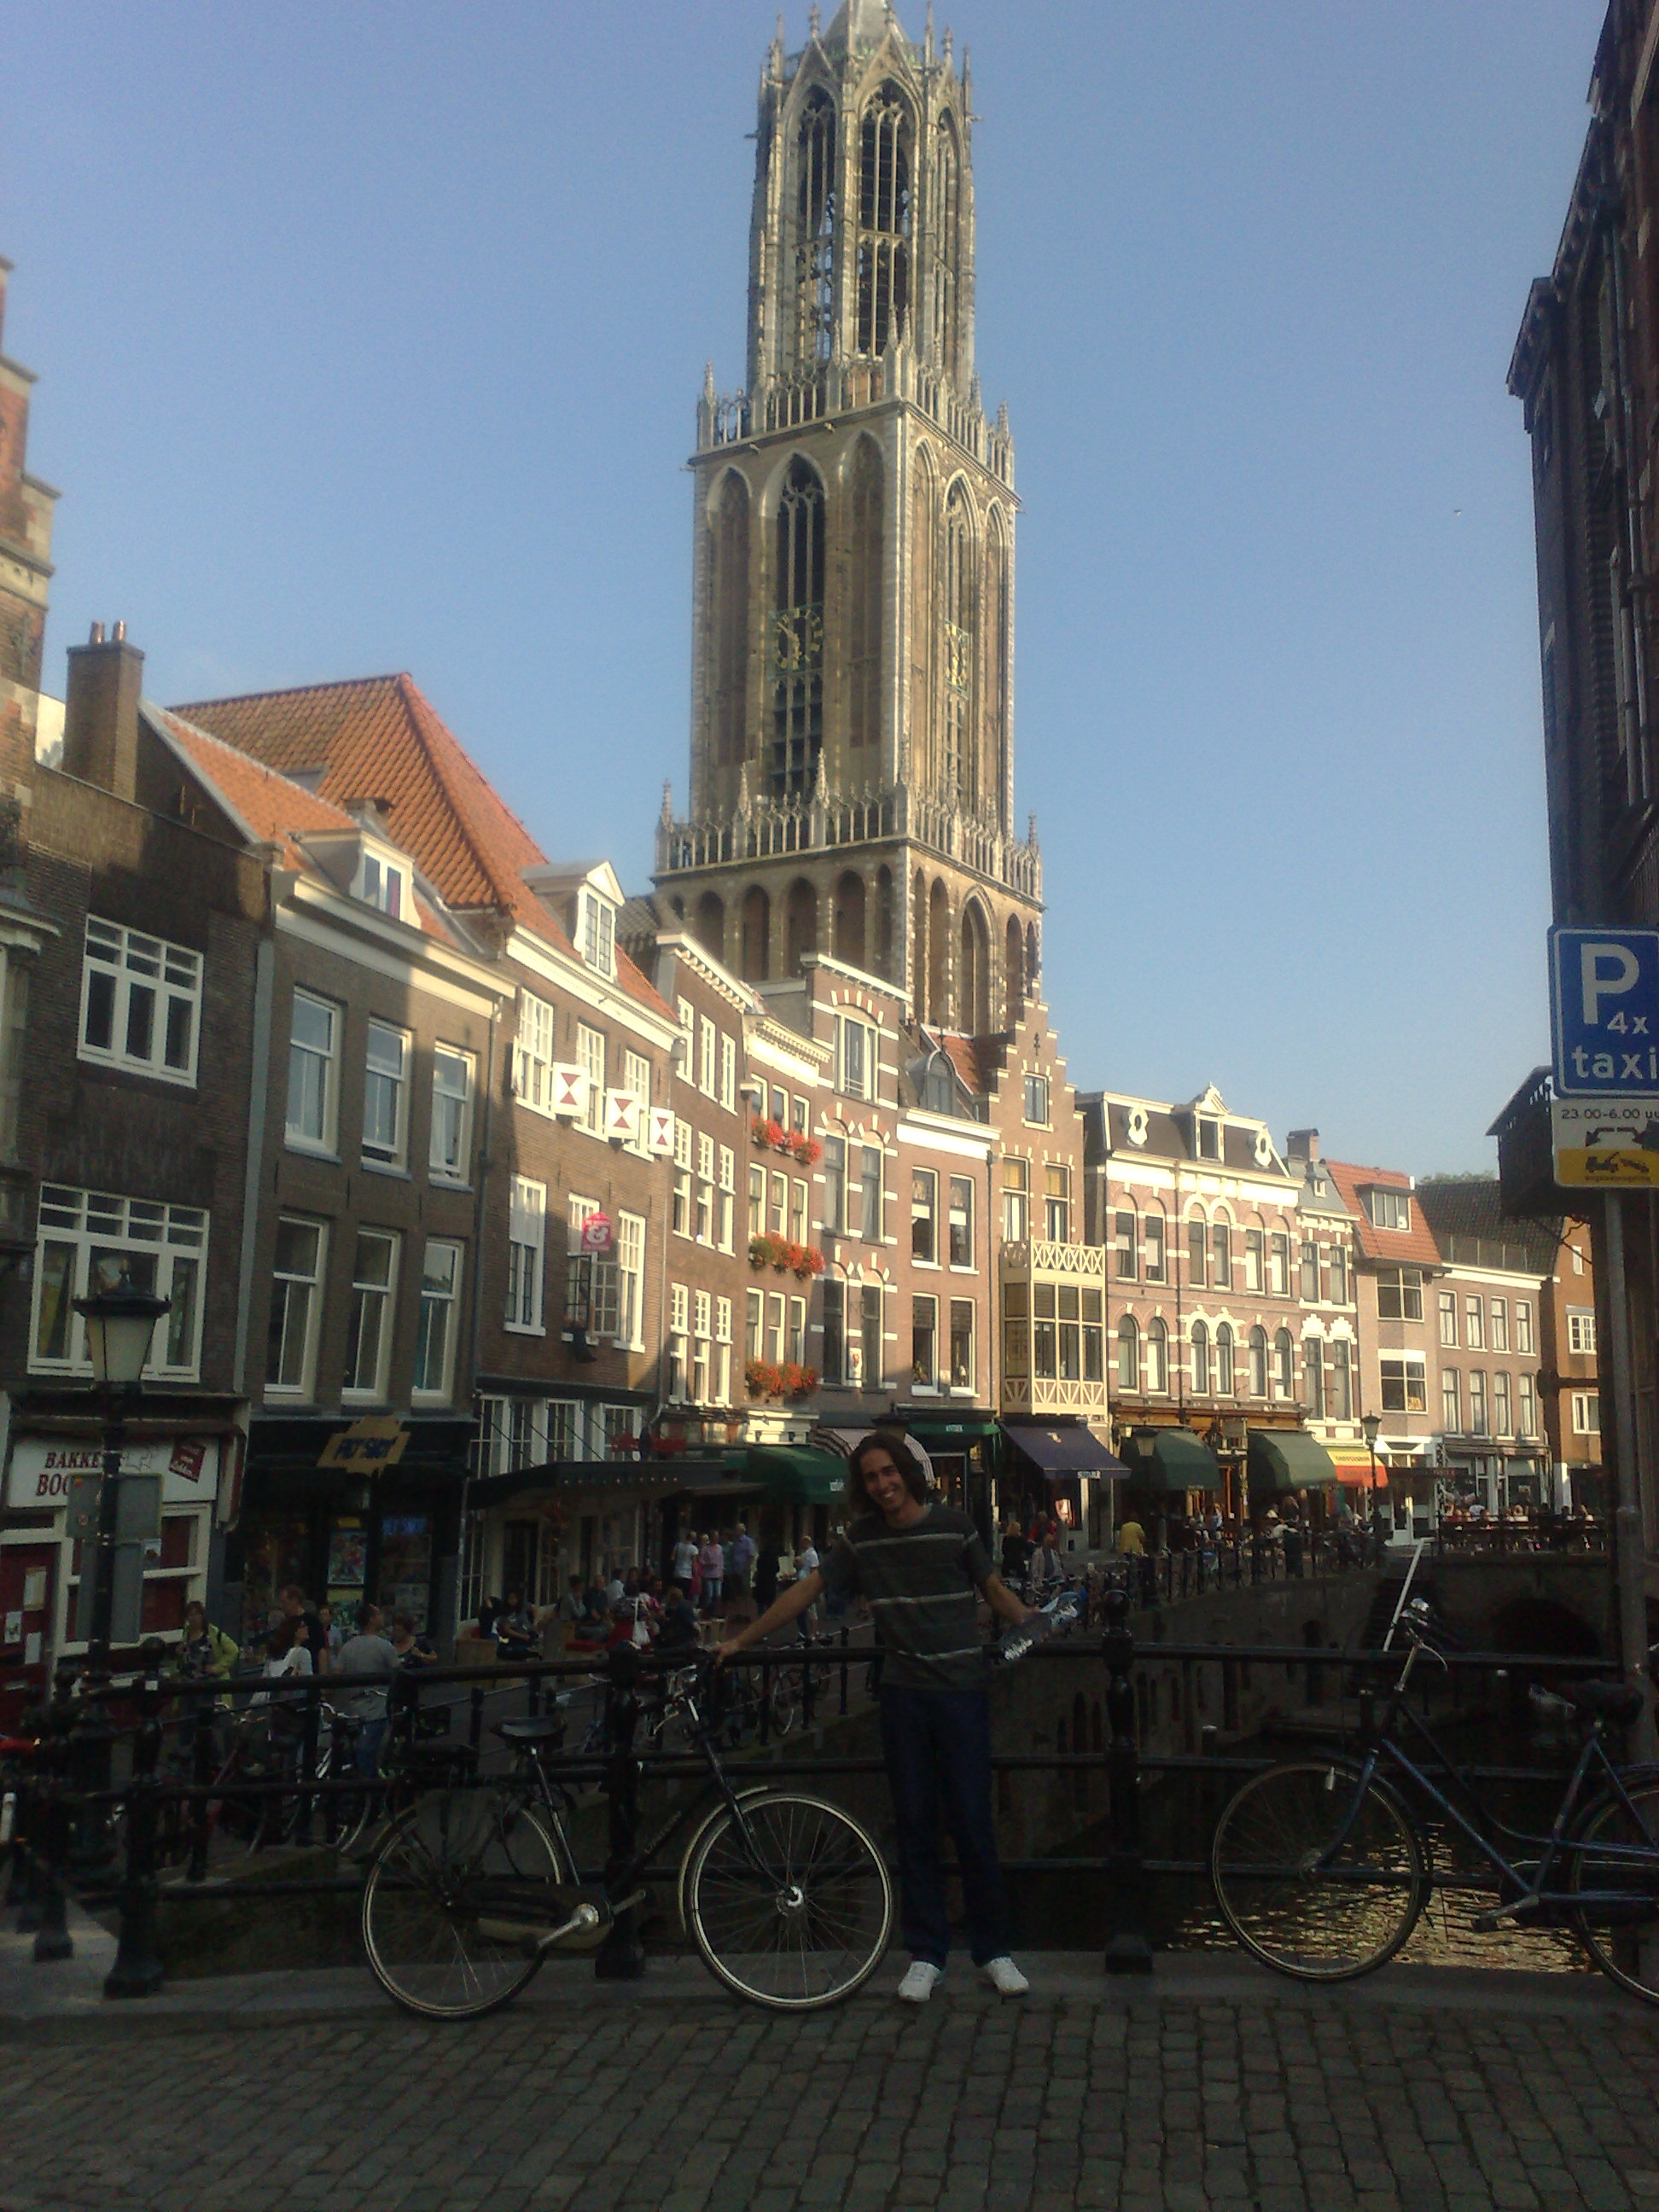 The bike, the town, the Dom tower…